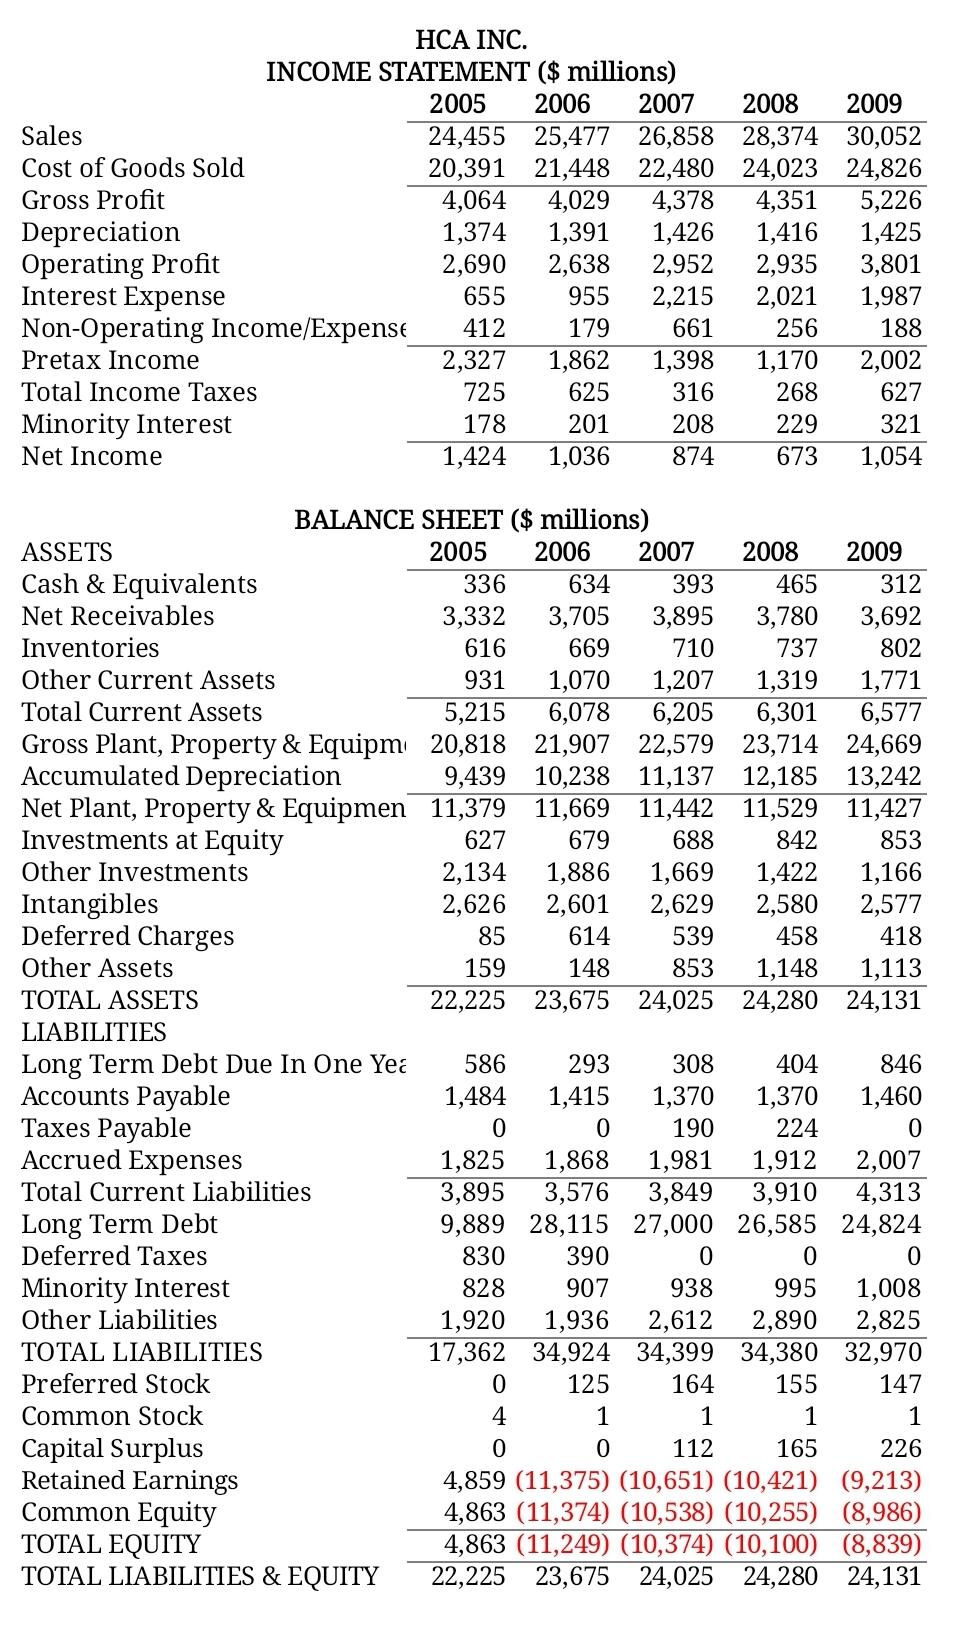 HCA INC. INCOME STATEMENT ($ millions) 2005 2006 2007 Sales 24,455 25,477 26,858 Cost of Goods Sold 20,391 21,448 22,480 Gros